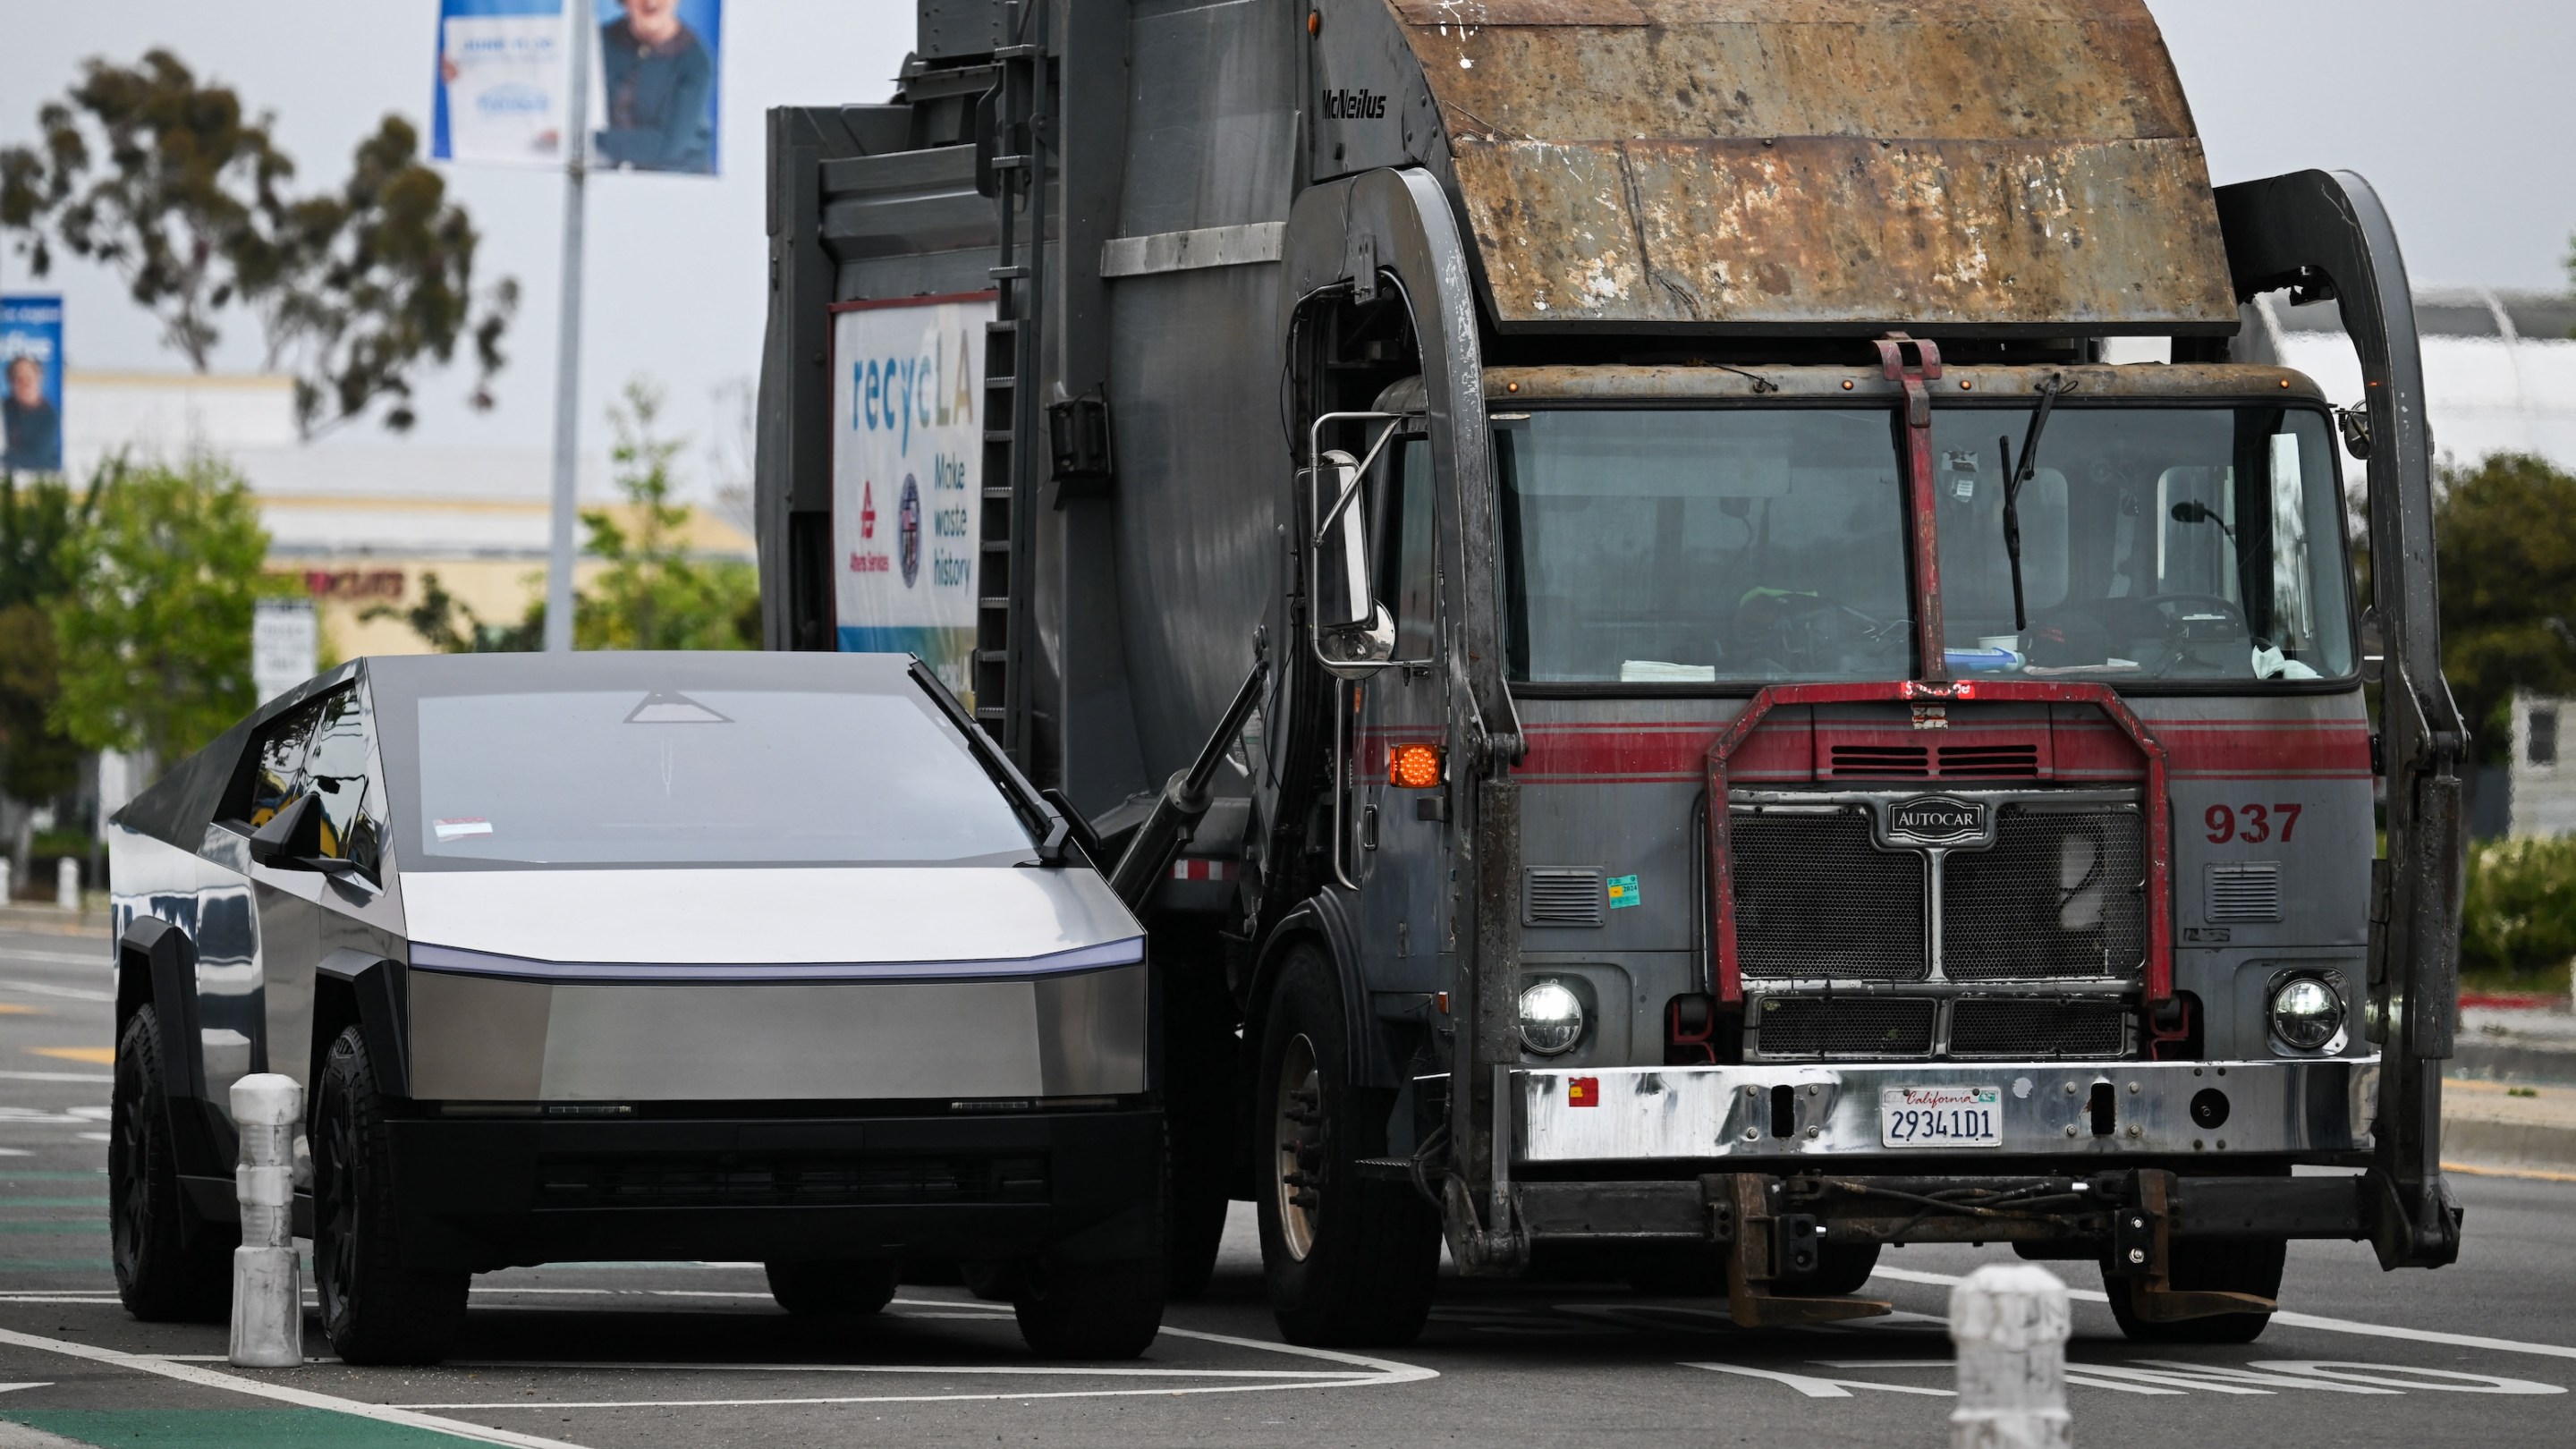 A Tesla Cybertruck electric vehicle sits parked next to a garbage truck in Los Angeles.